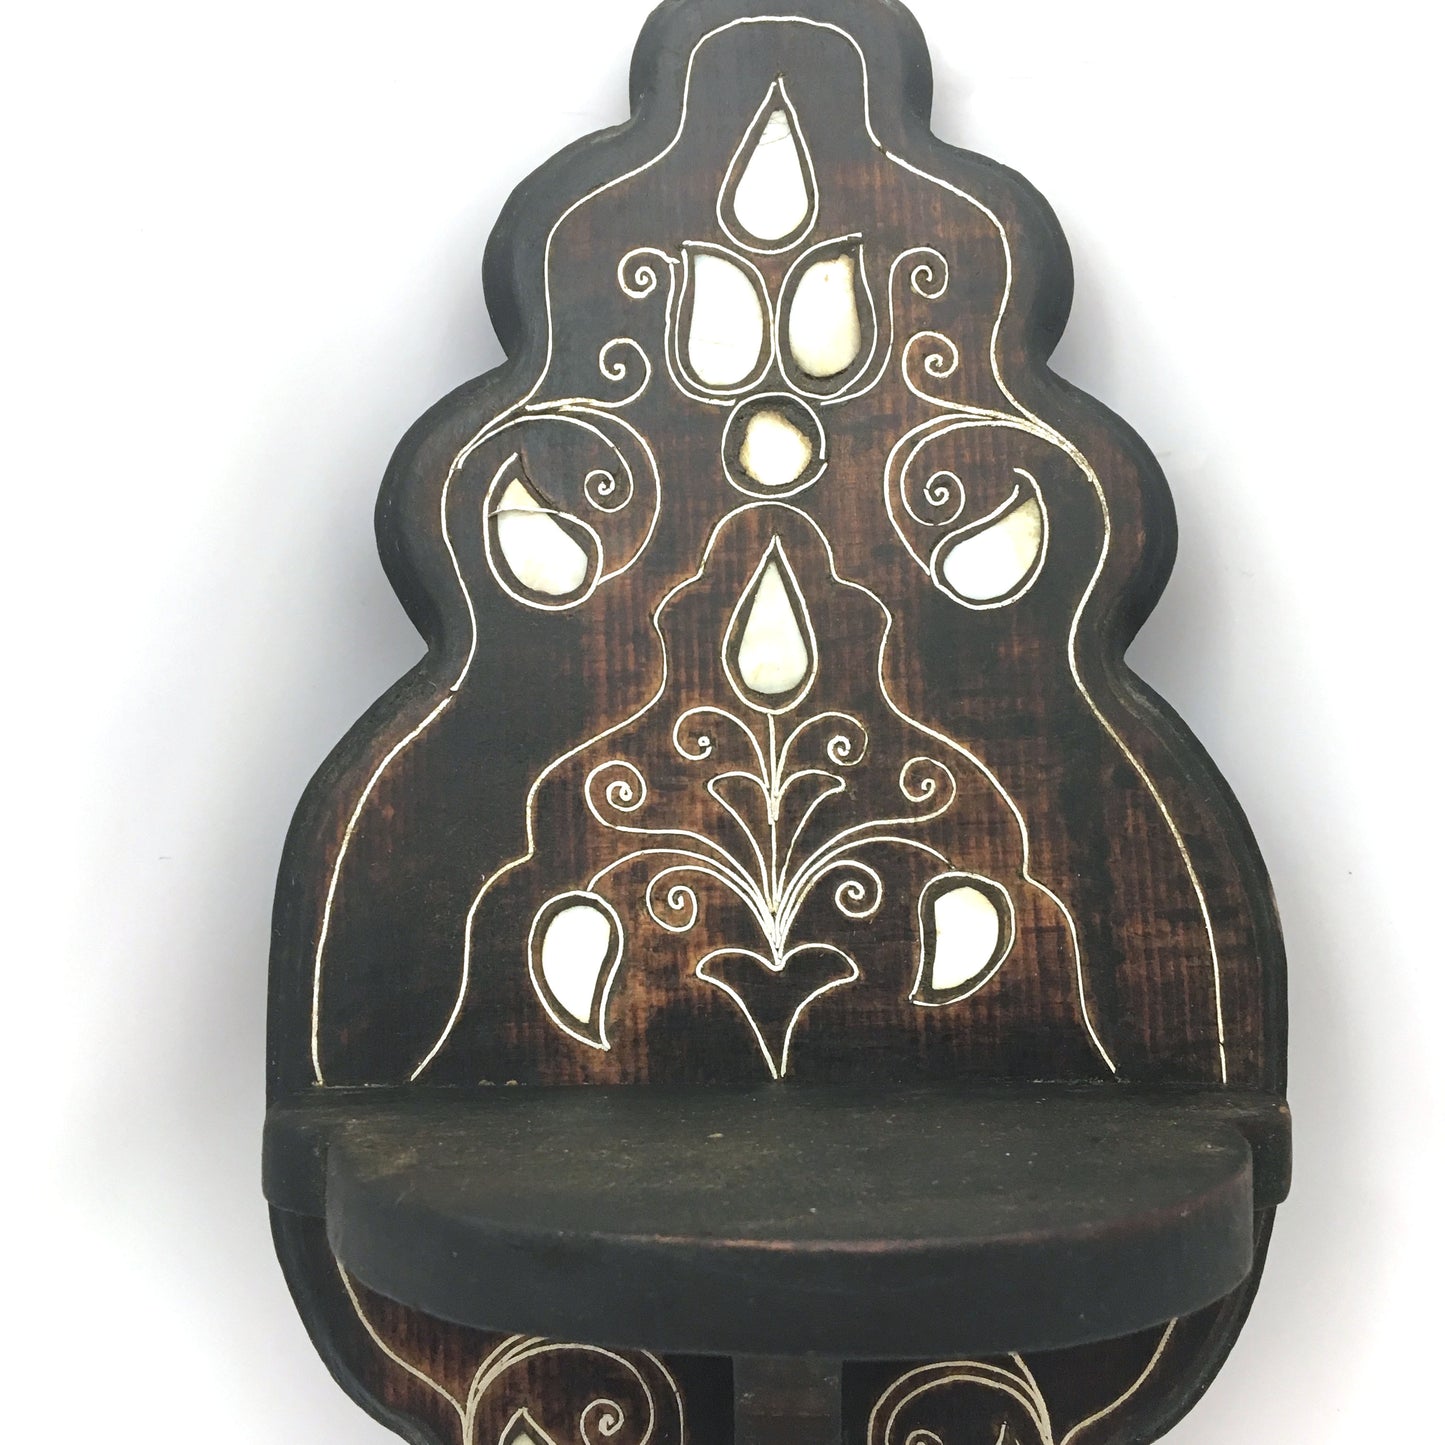 Ethnic Indian Home Decorative Wooden Hand-carved Wall Shelf / Wall Hanging